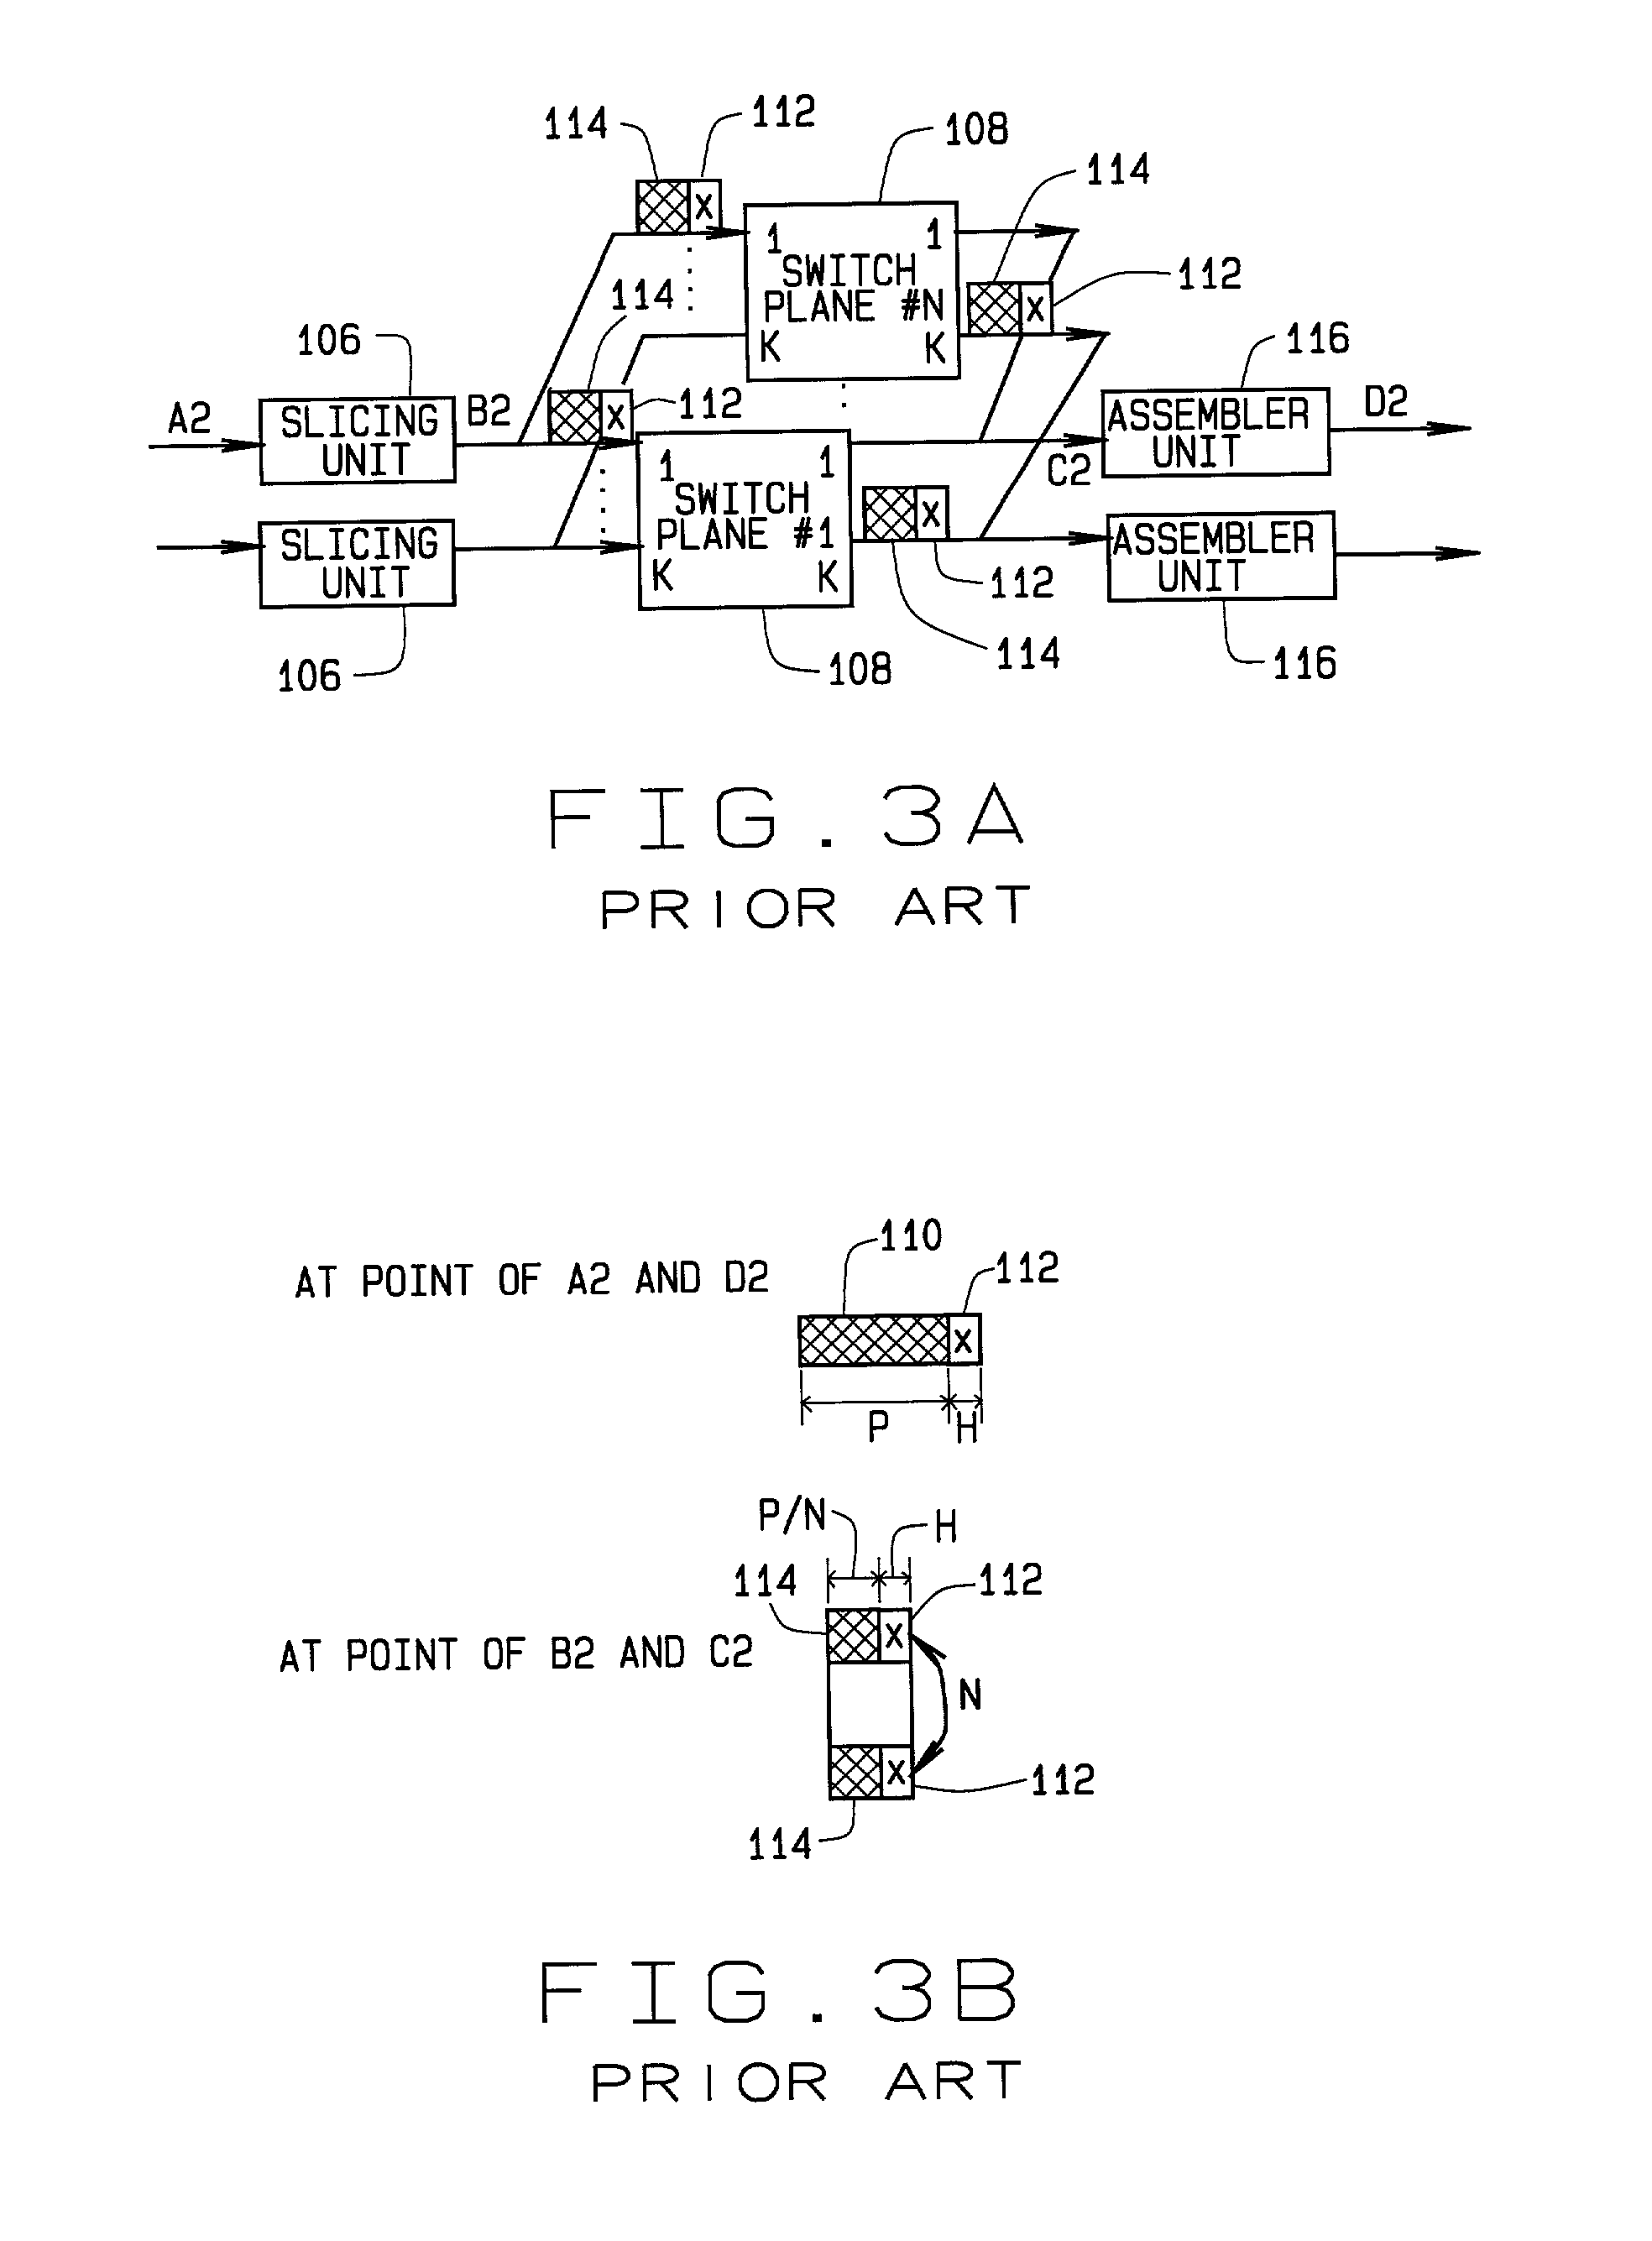 Method and apparatus for high speed packet switching using train packet queuing and providing high scalability